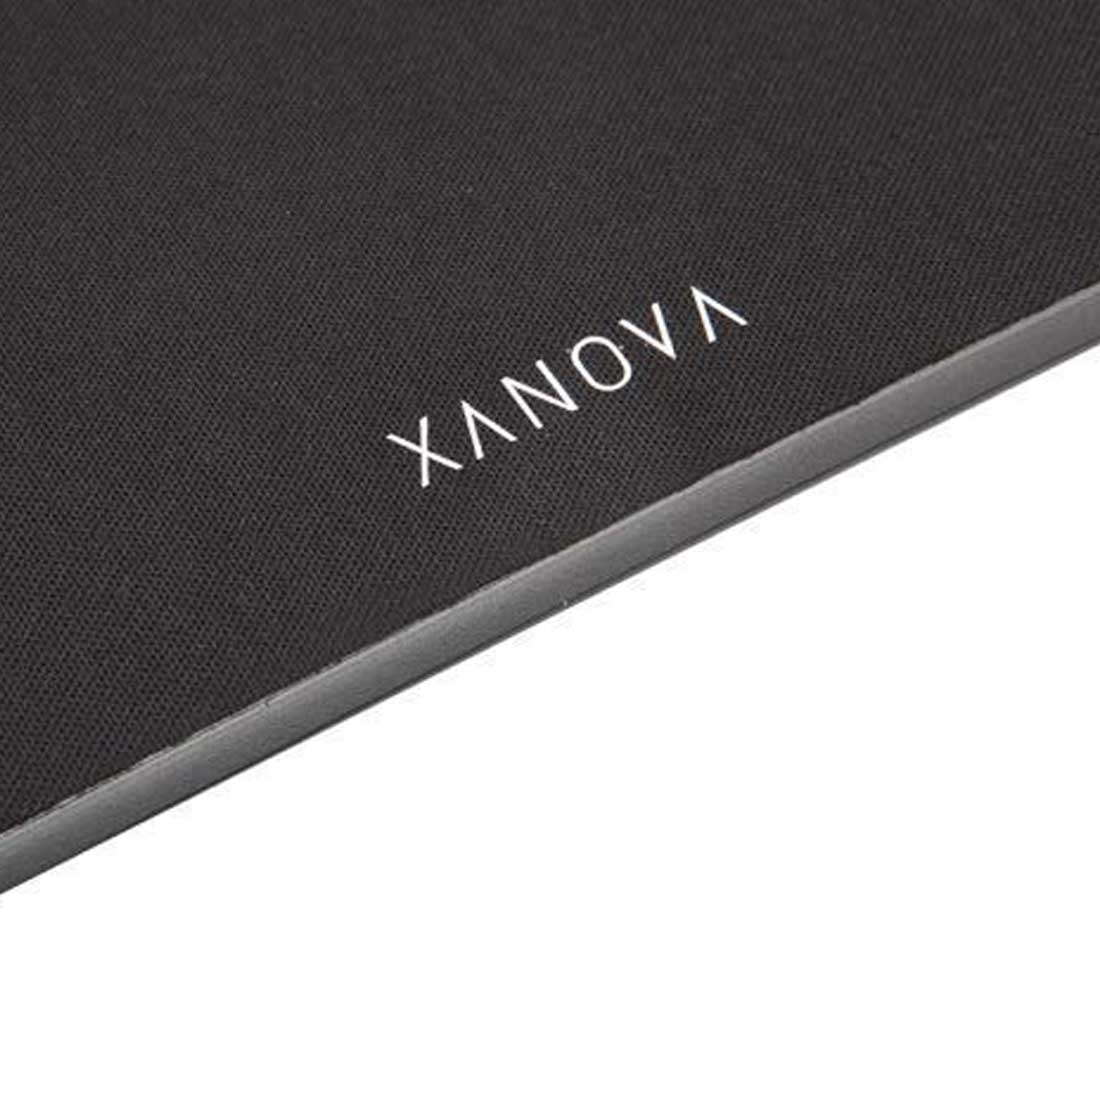 [RePacked] Xanova Phobos Luxe-R RGB Gaming Mousepad with 6 Lighting Effects